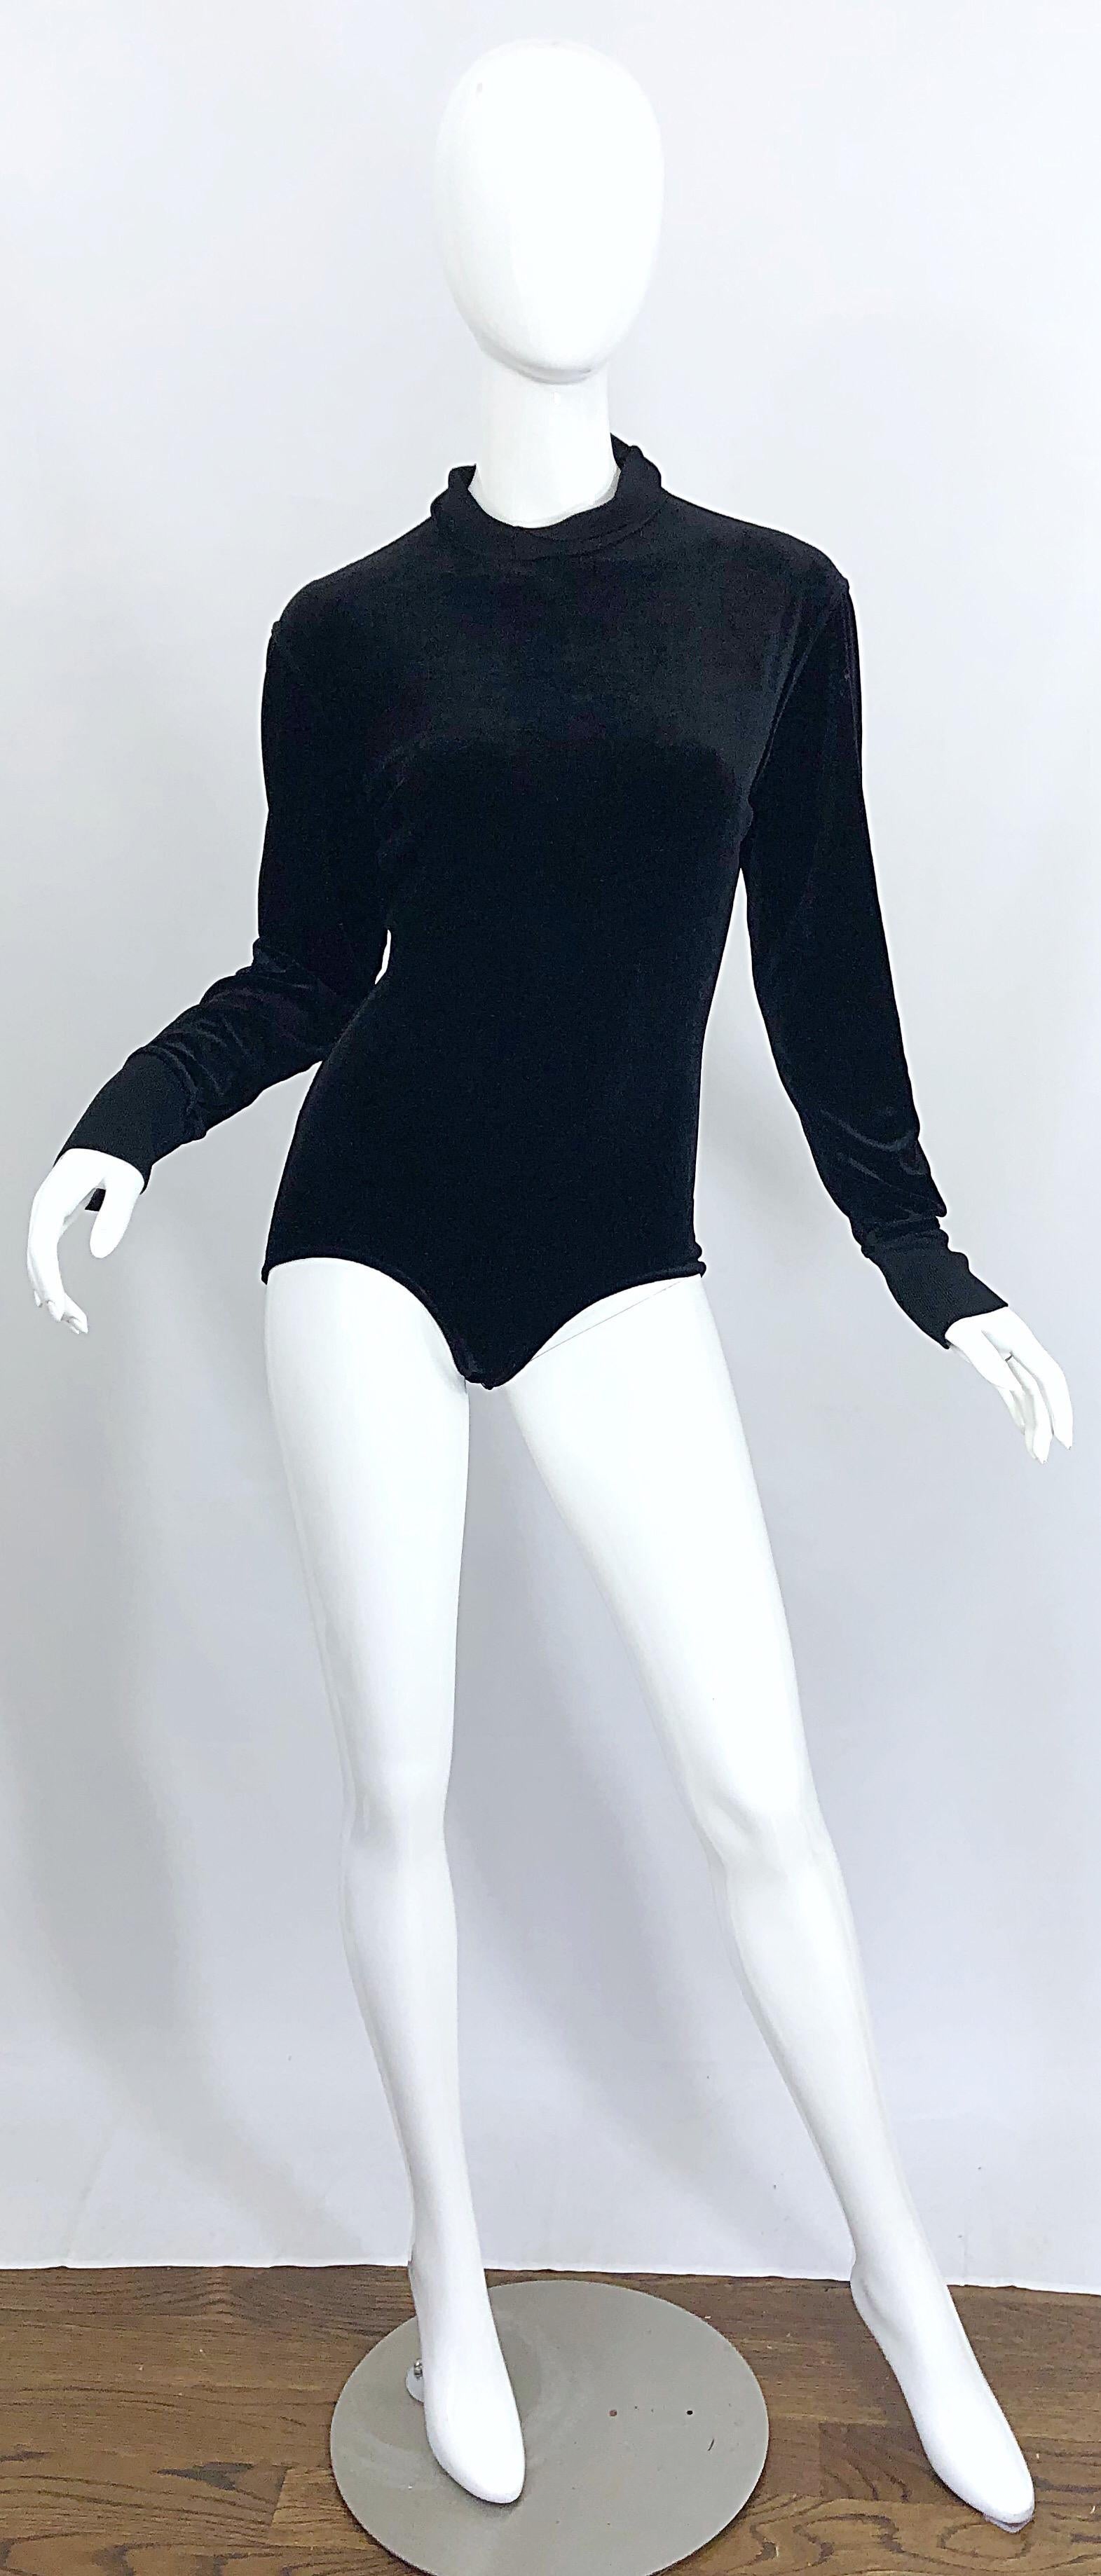 Iconic 1980s AZZEDINE ALAIA black stretch velvet one piece bodysuit! No one ever made bodysuits as well as Alaia, and this is definitely proof. Features a super soft black velvet that stretches to fit. Hidden zipper up the back collar. Hidden snaps.